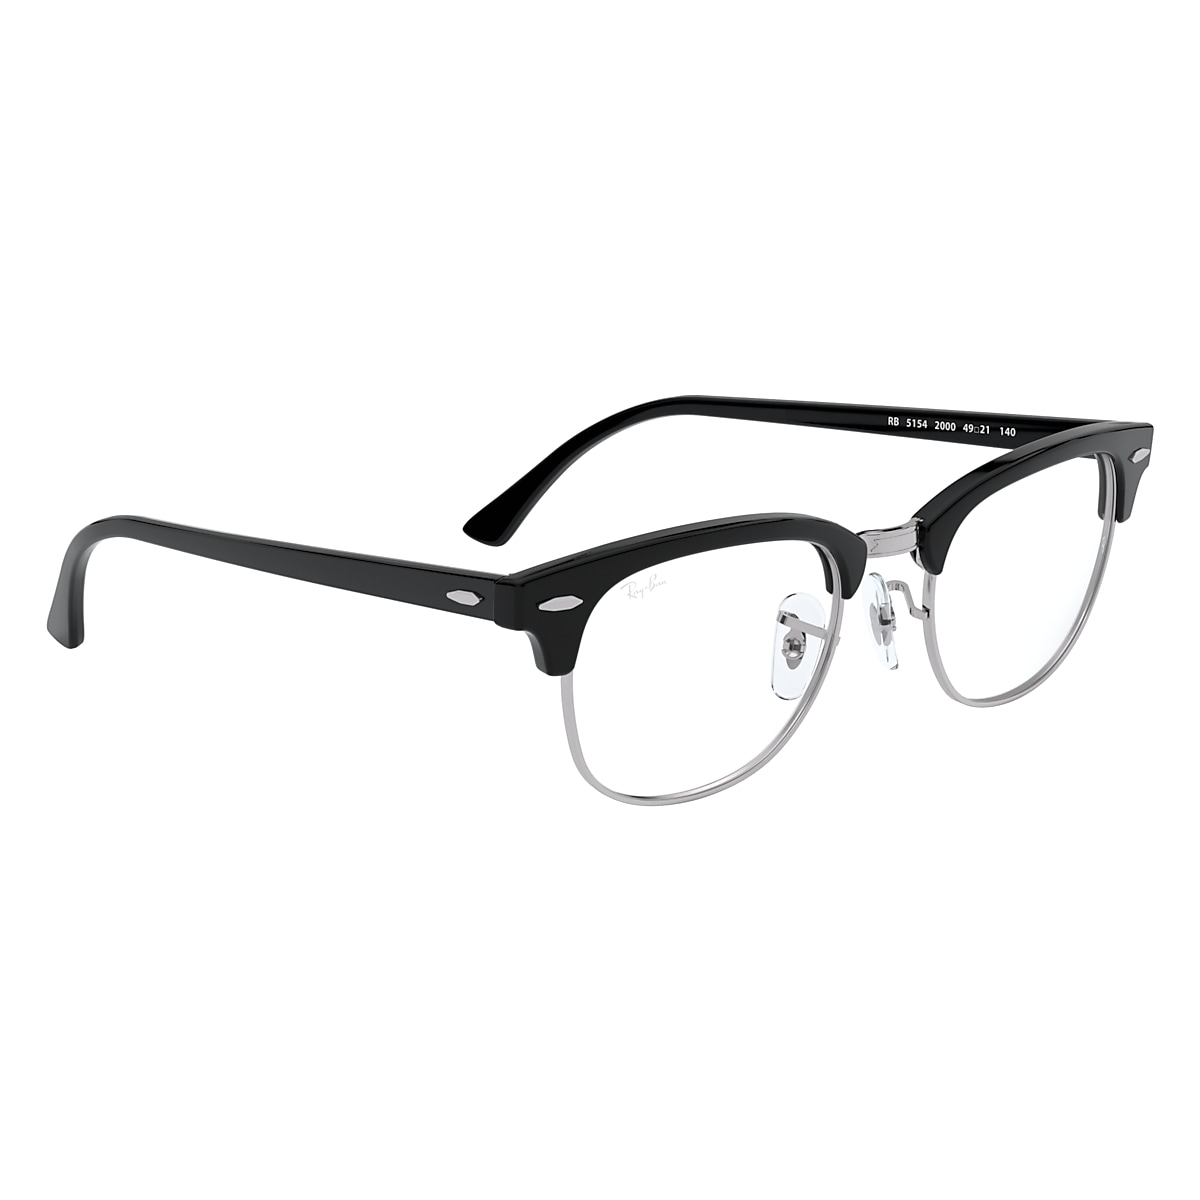 CLUBMASTER OPTICS Eyeglasses with Black On Silver Frame - RB5154